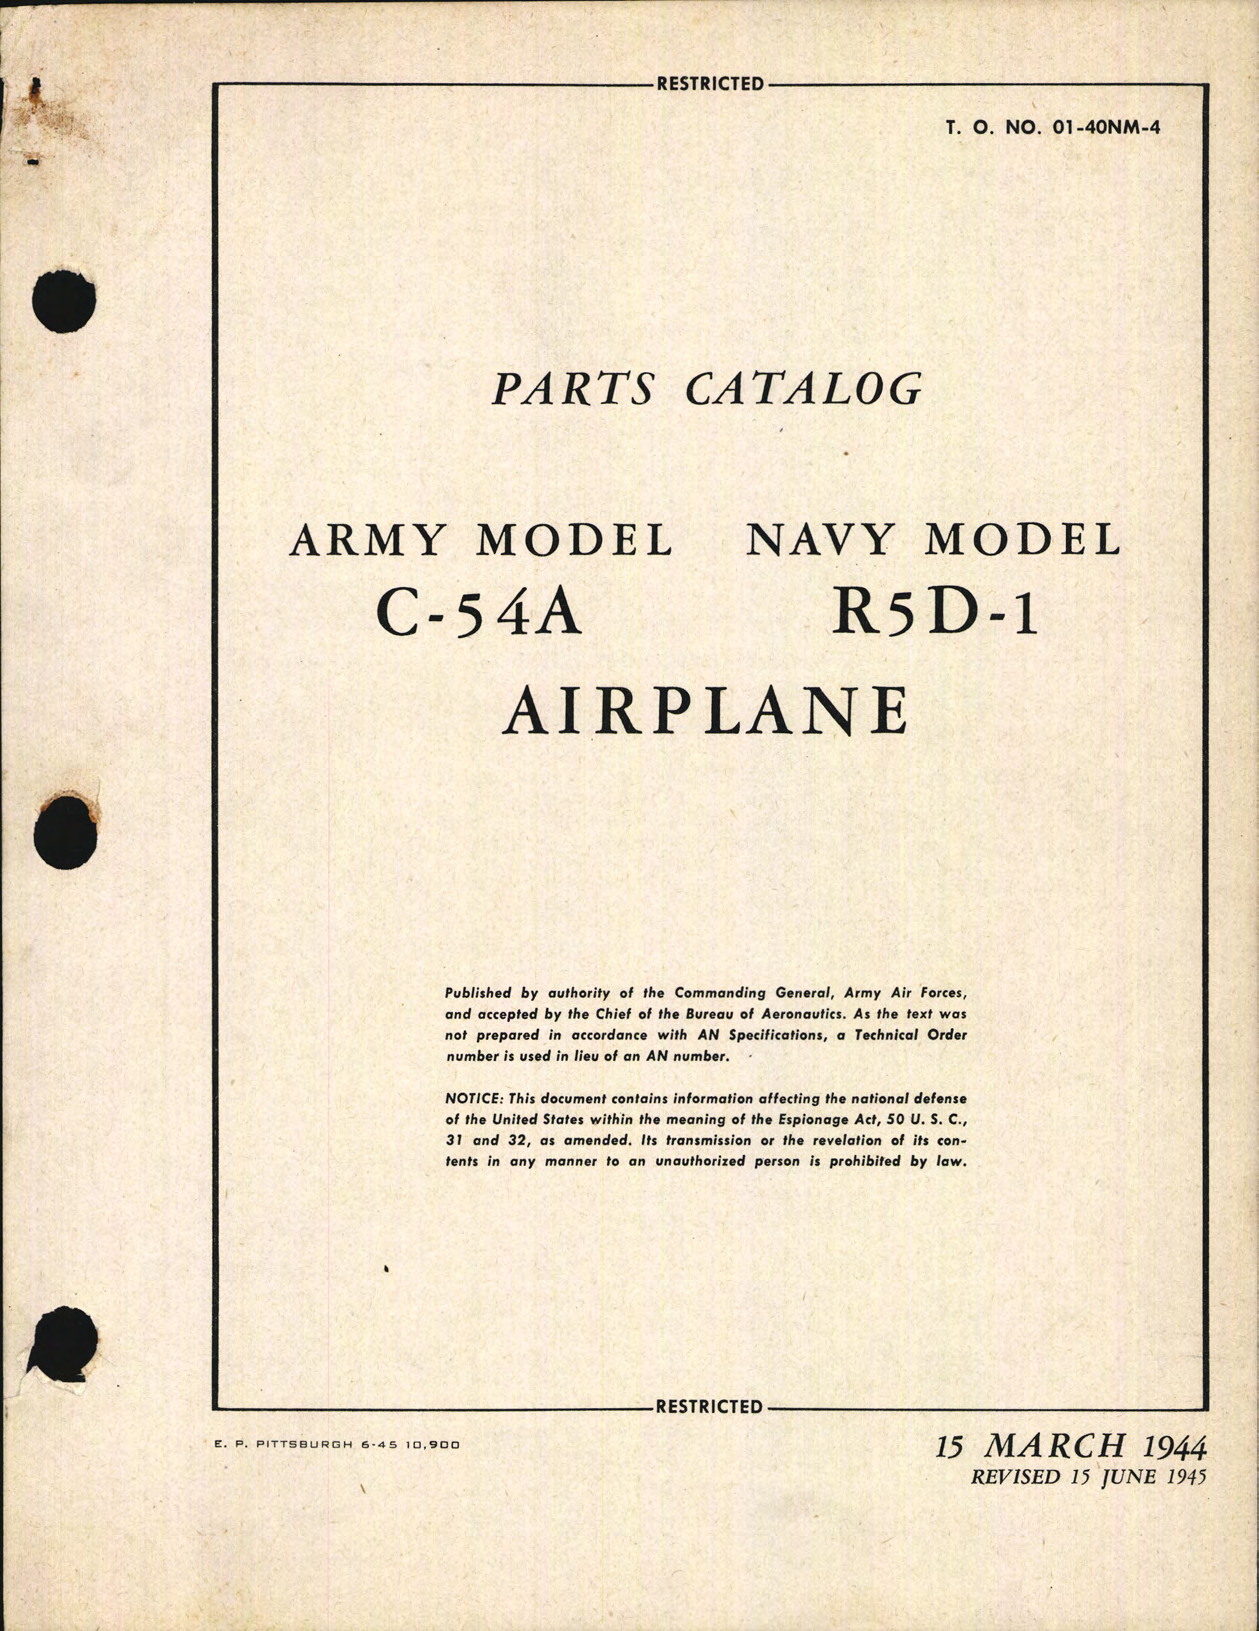 Sample page 1 from AirCorps Library document: Parts Catalog for C-54A and R5D-1